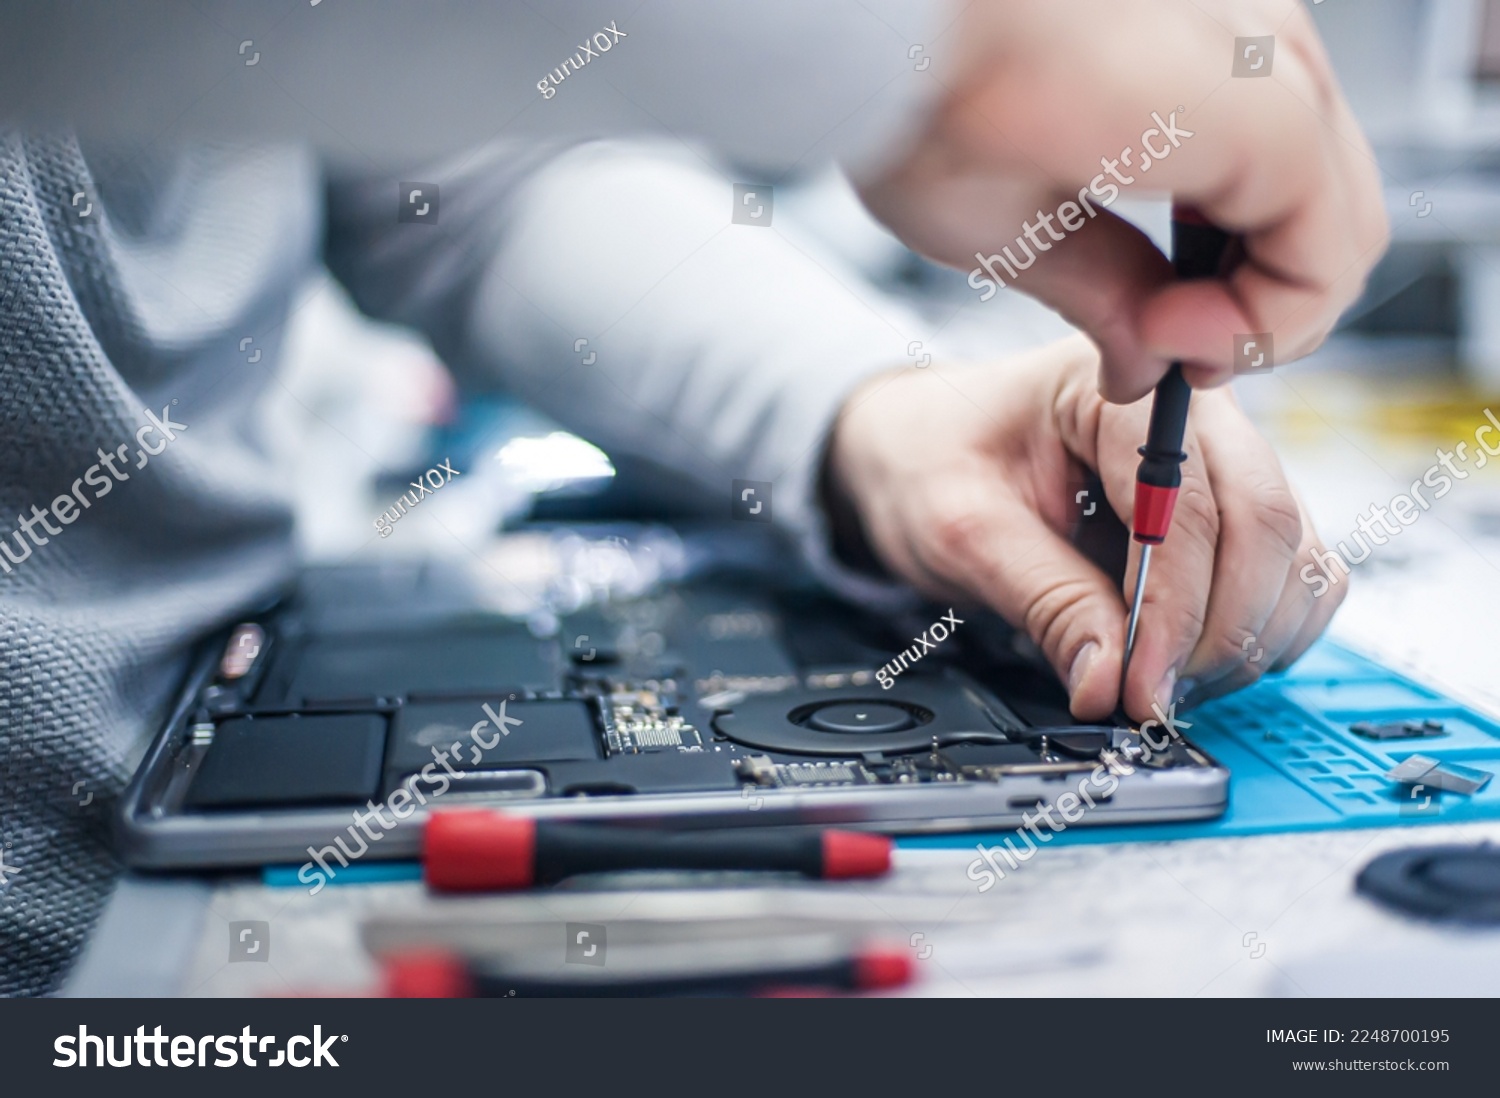 Technical support and fixing gadgets problems. Servicing, repairing, cleaning, maintaining computers. Repair shop. Hardware maintenance. Male technicians fixing disassembled laptop parts.  #2248700195